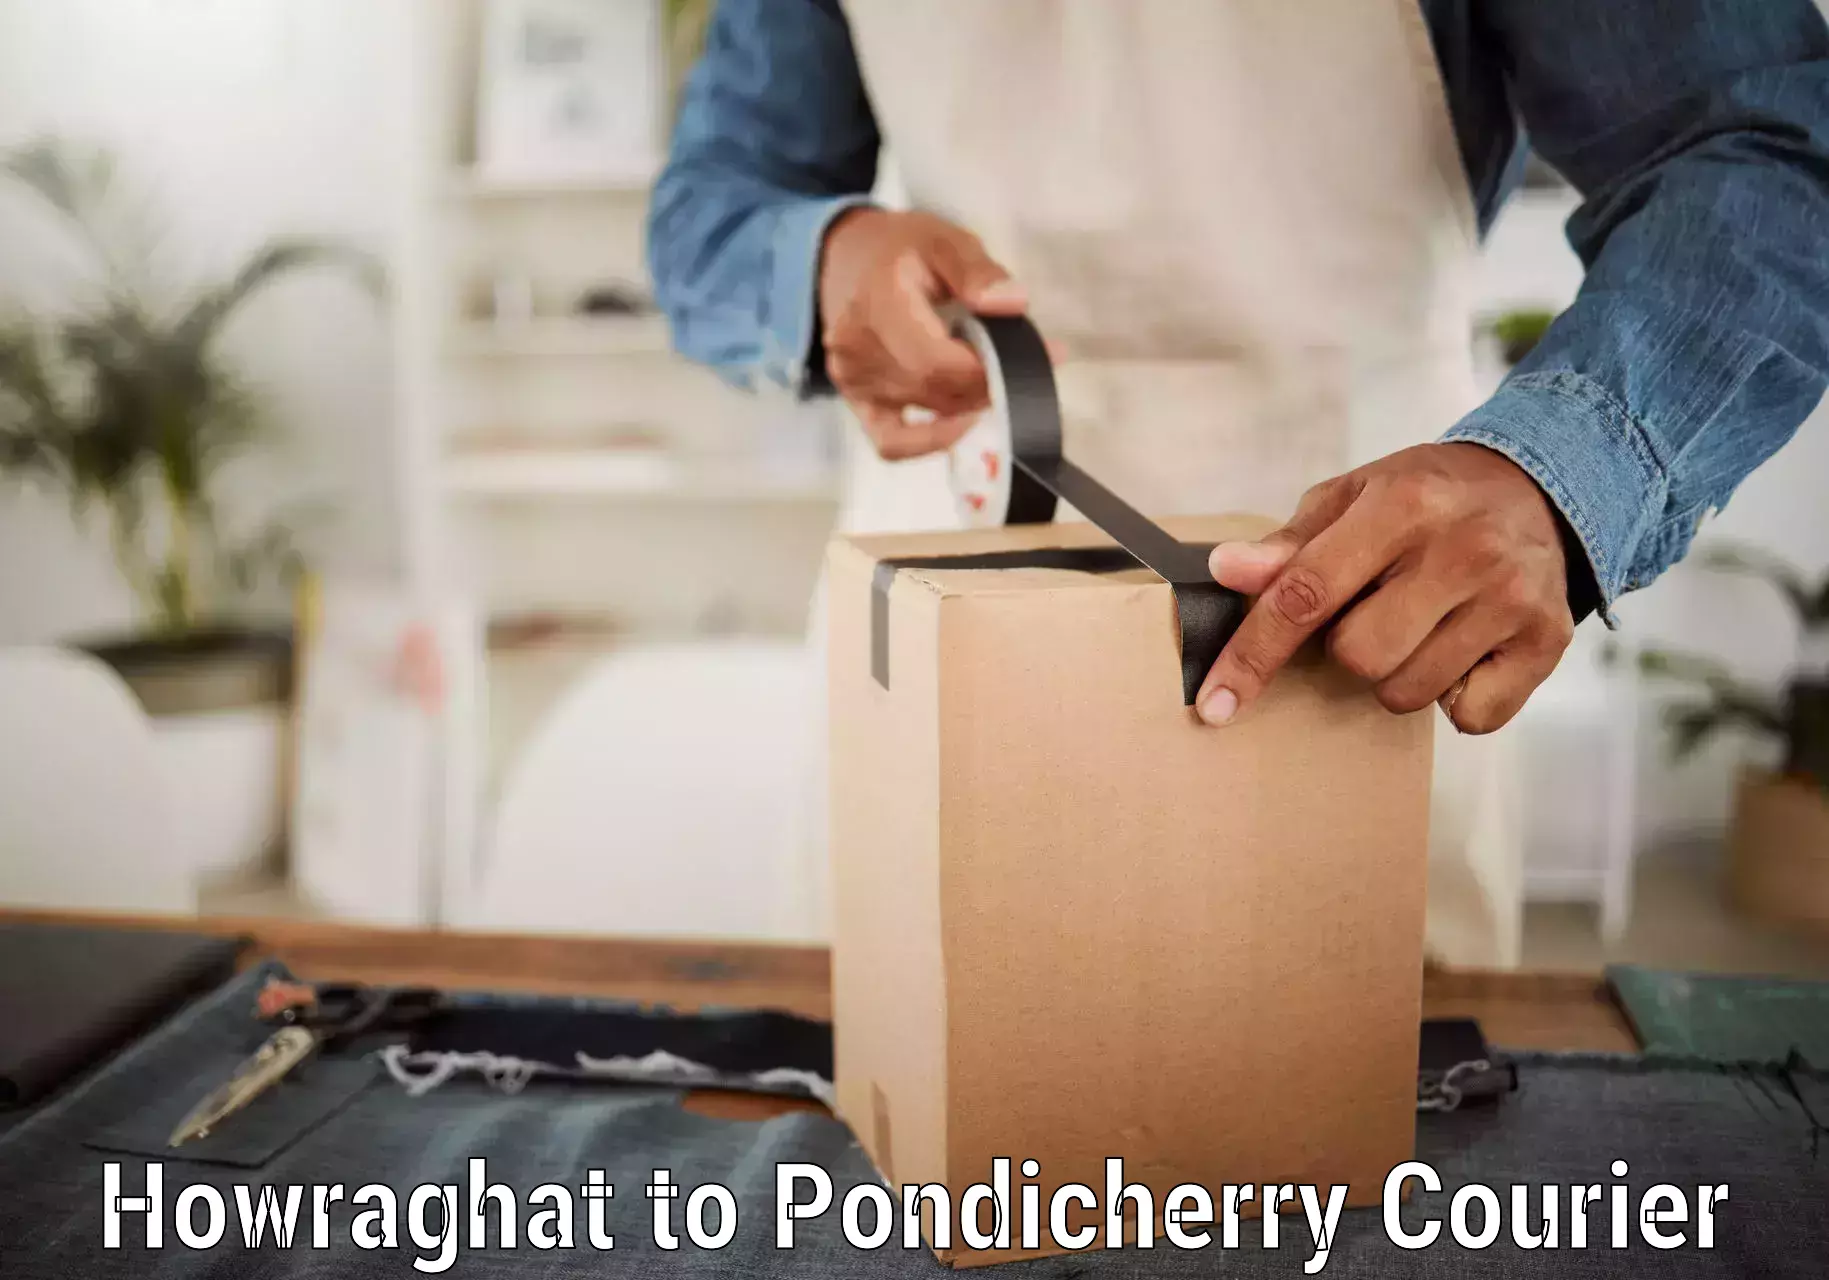 Courier tracking online Howraghat to Pondicherry University